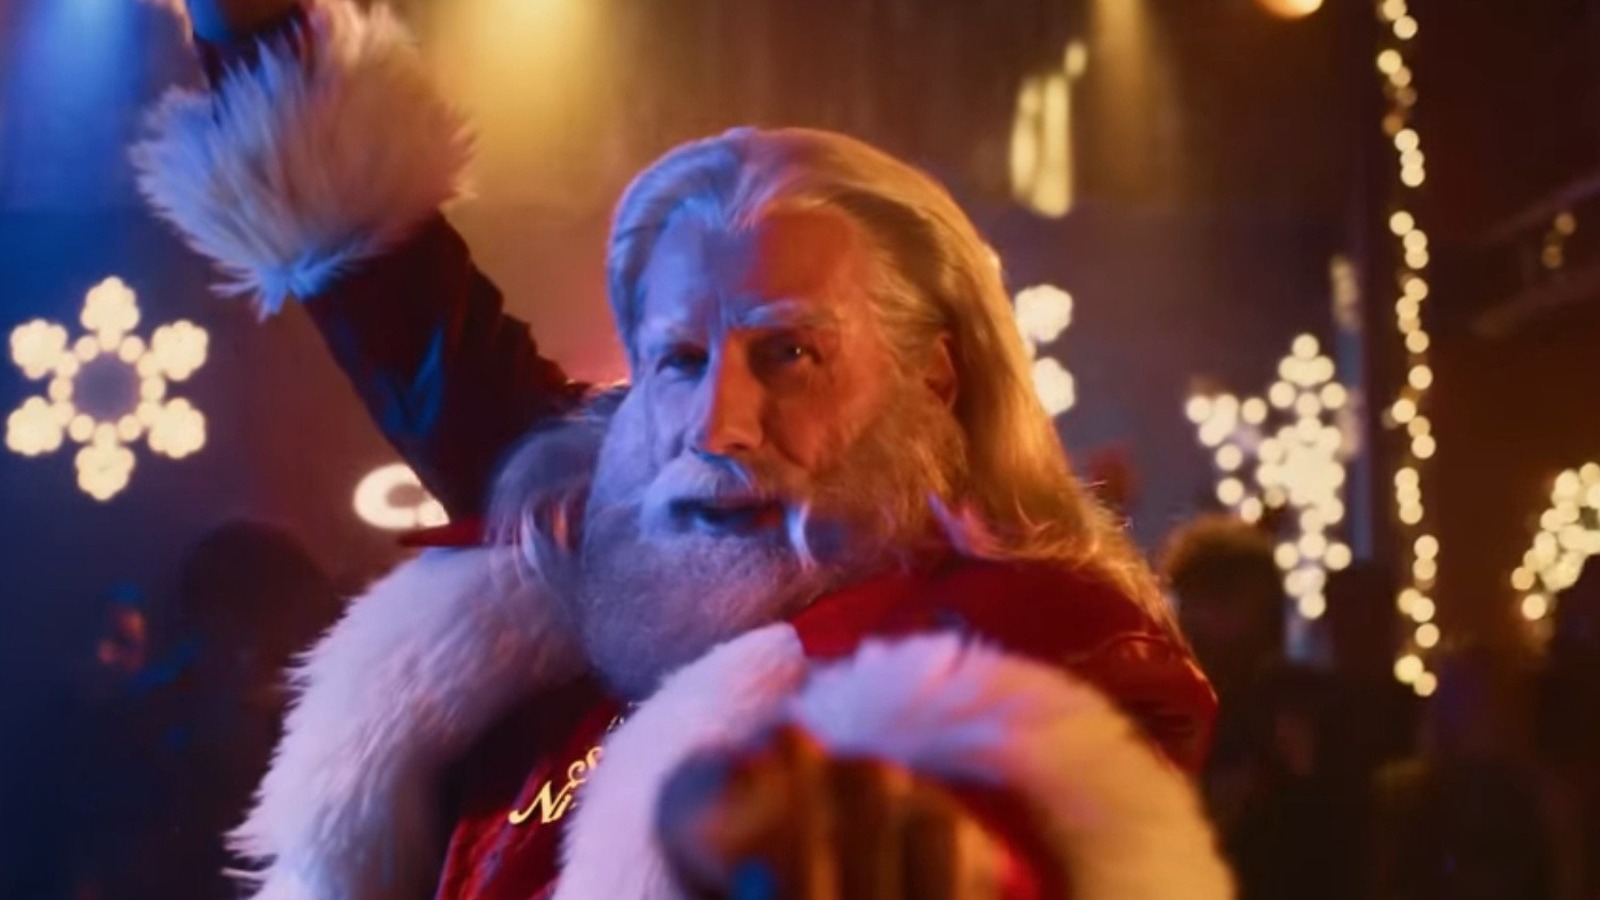 Who Else From Saturday Night Fever Is In John Travolta's Santa Claus